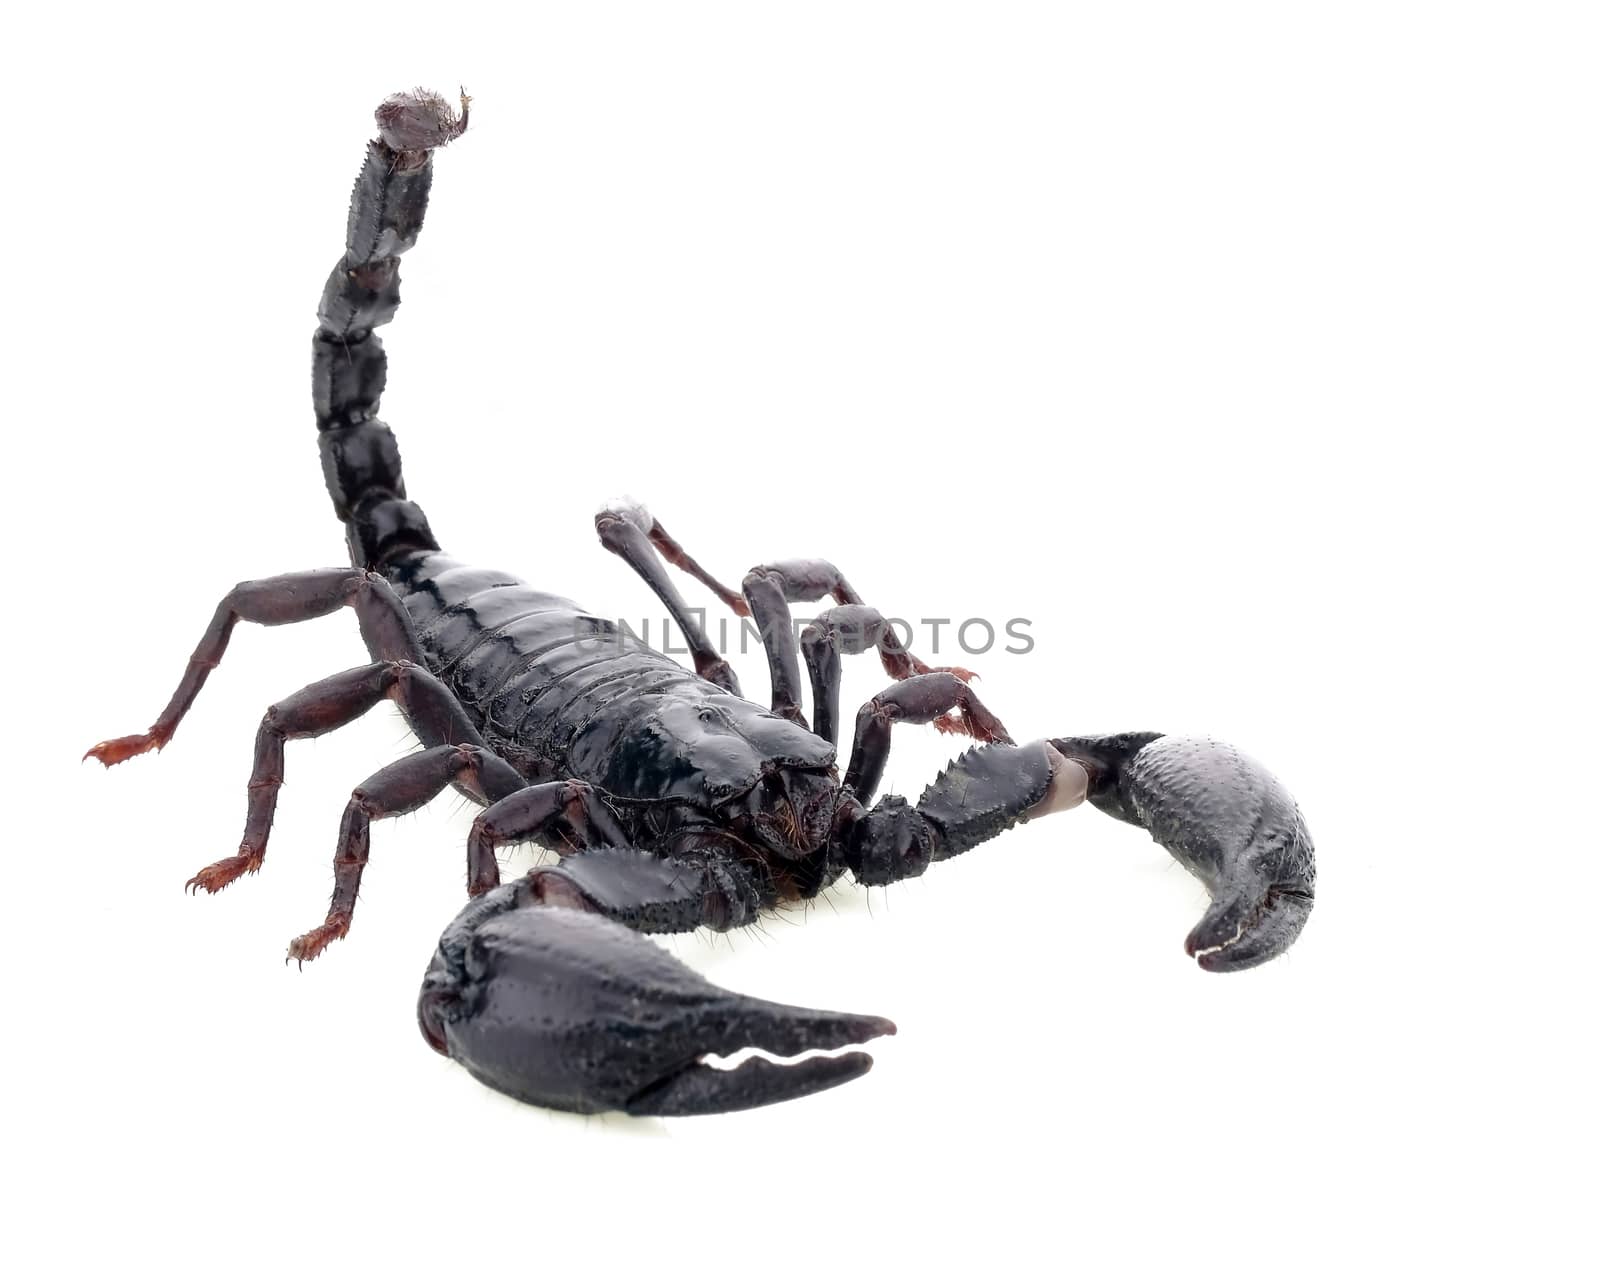 Scorpion on white background. by poungsaed